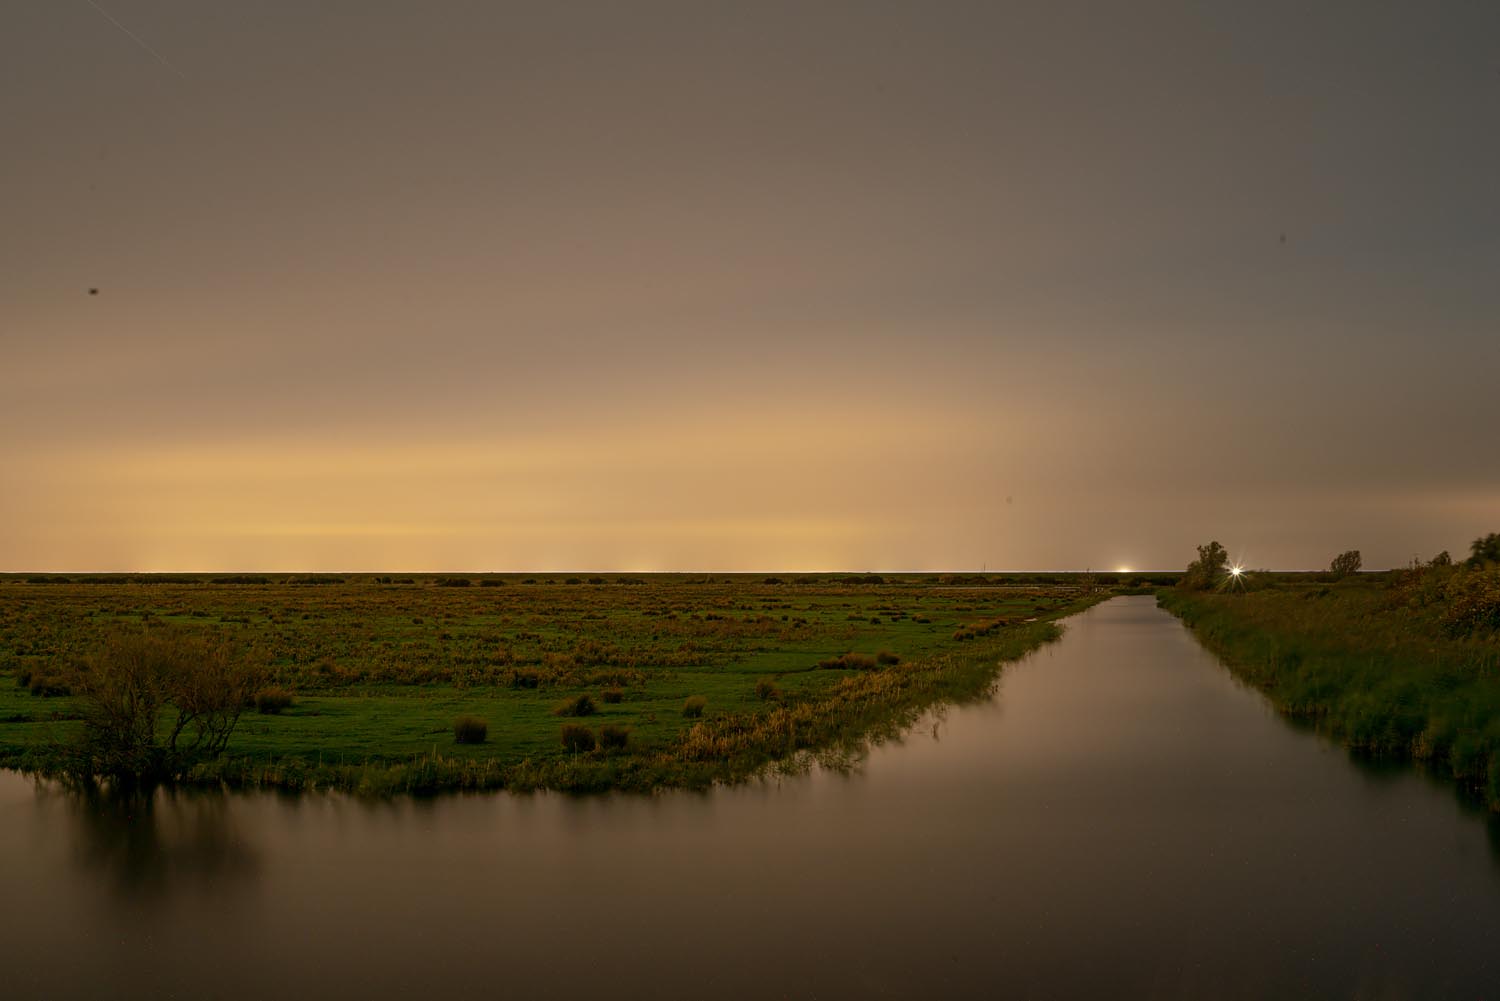 Sites at Risk of Climate Change: Night Landscape Photographs in The Netherlands, Steve Giovinco, Canal, Nieuw Land National Park, with Light in Distance, Flevoland